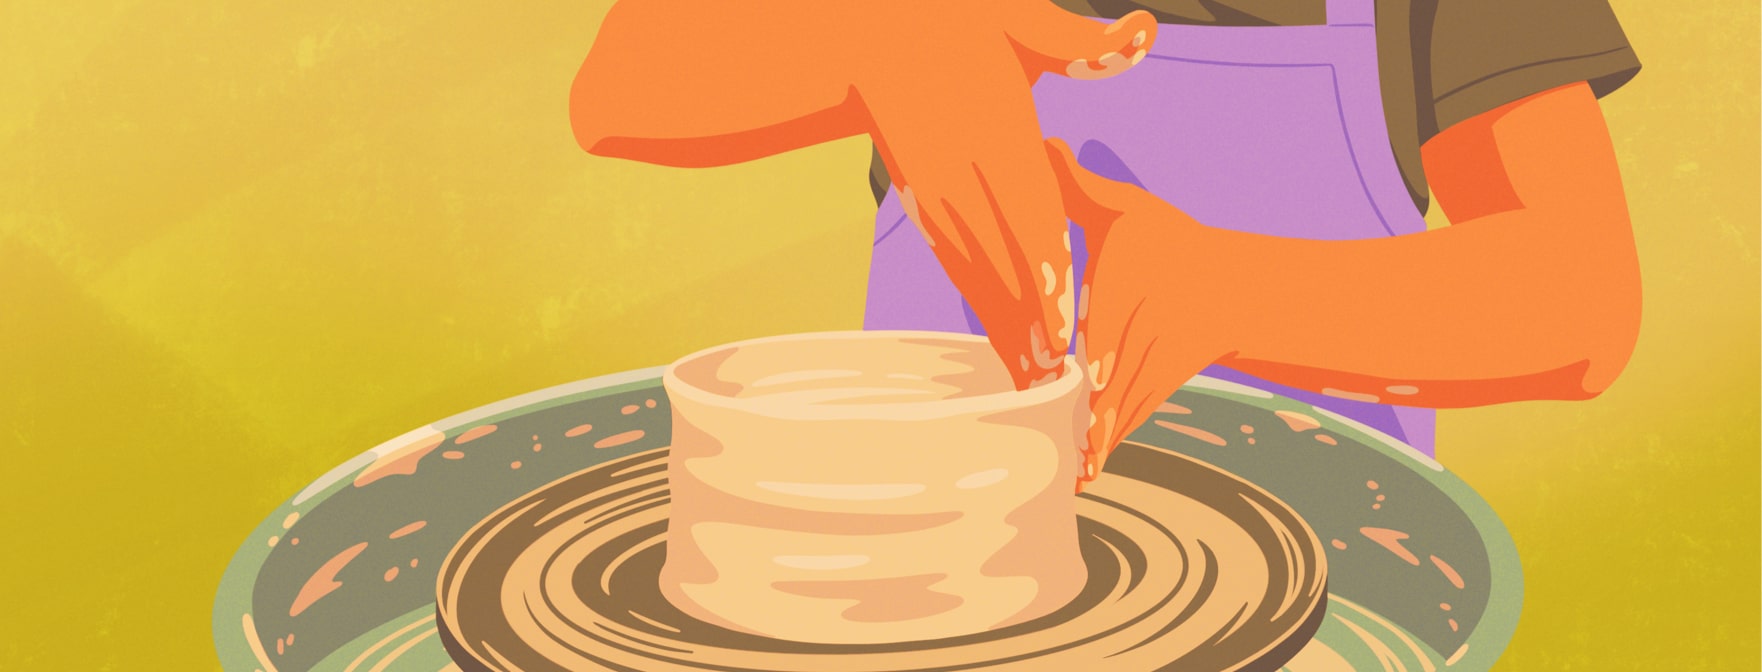 An individual wearing a purple apron leans over a pottery wheel molding clay.